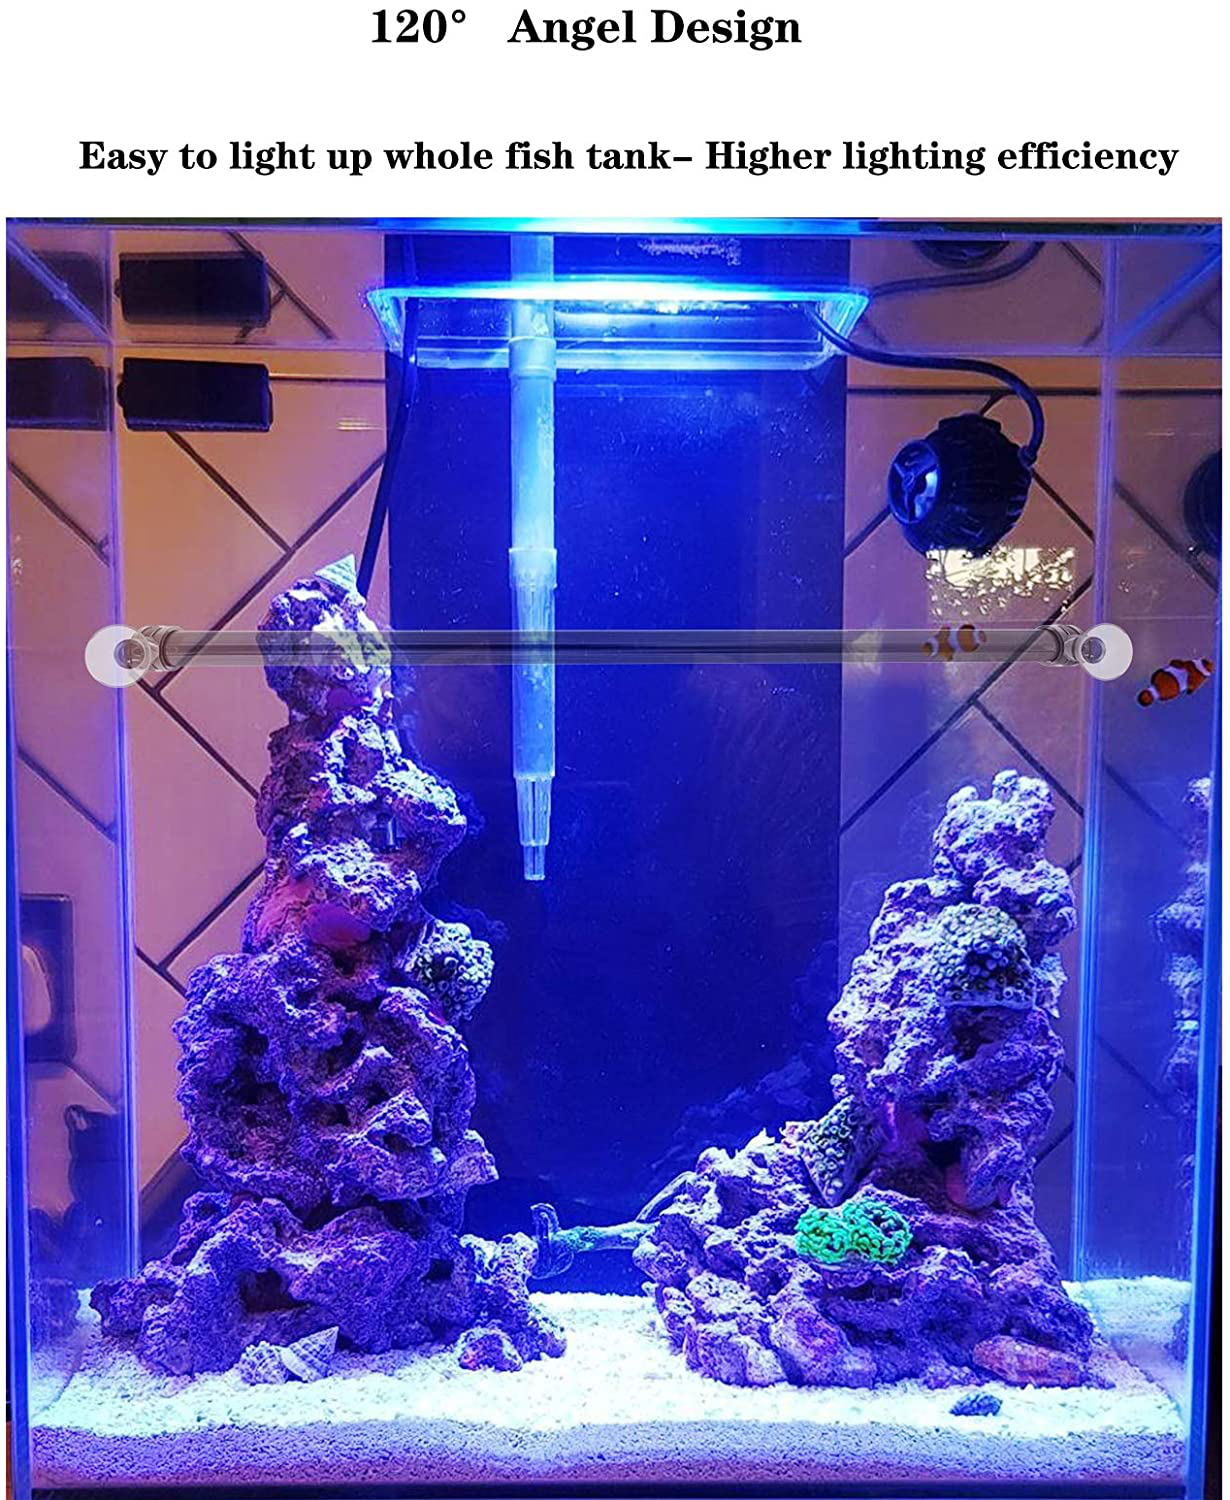 Lominie Submersible LED Aquarium Light, IP68 Waterproof Nano Tank Light with Timer, 3 Lighting Modes Dimmable Crystal Glass Light for Reef, Coral, Freshwater Refugium Algae Fish Tank